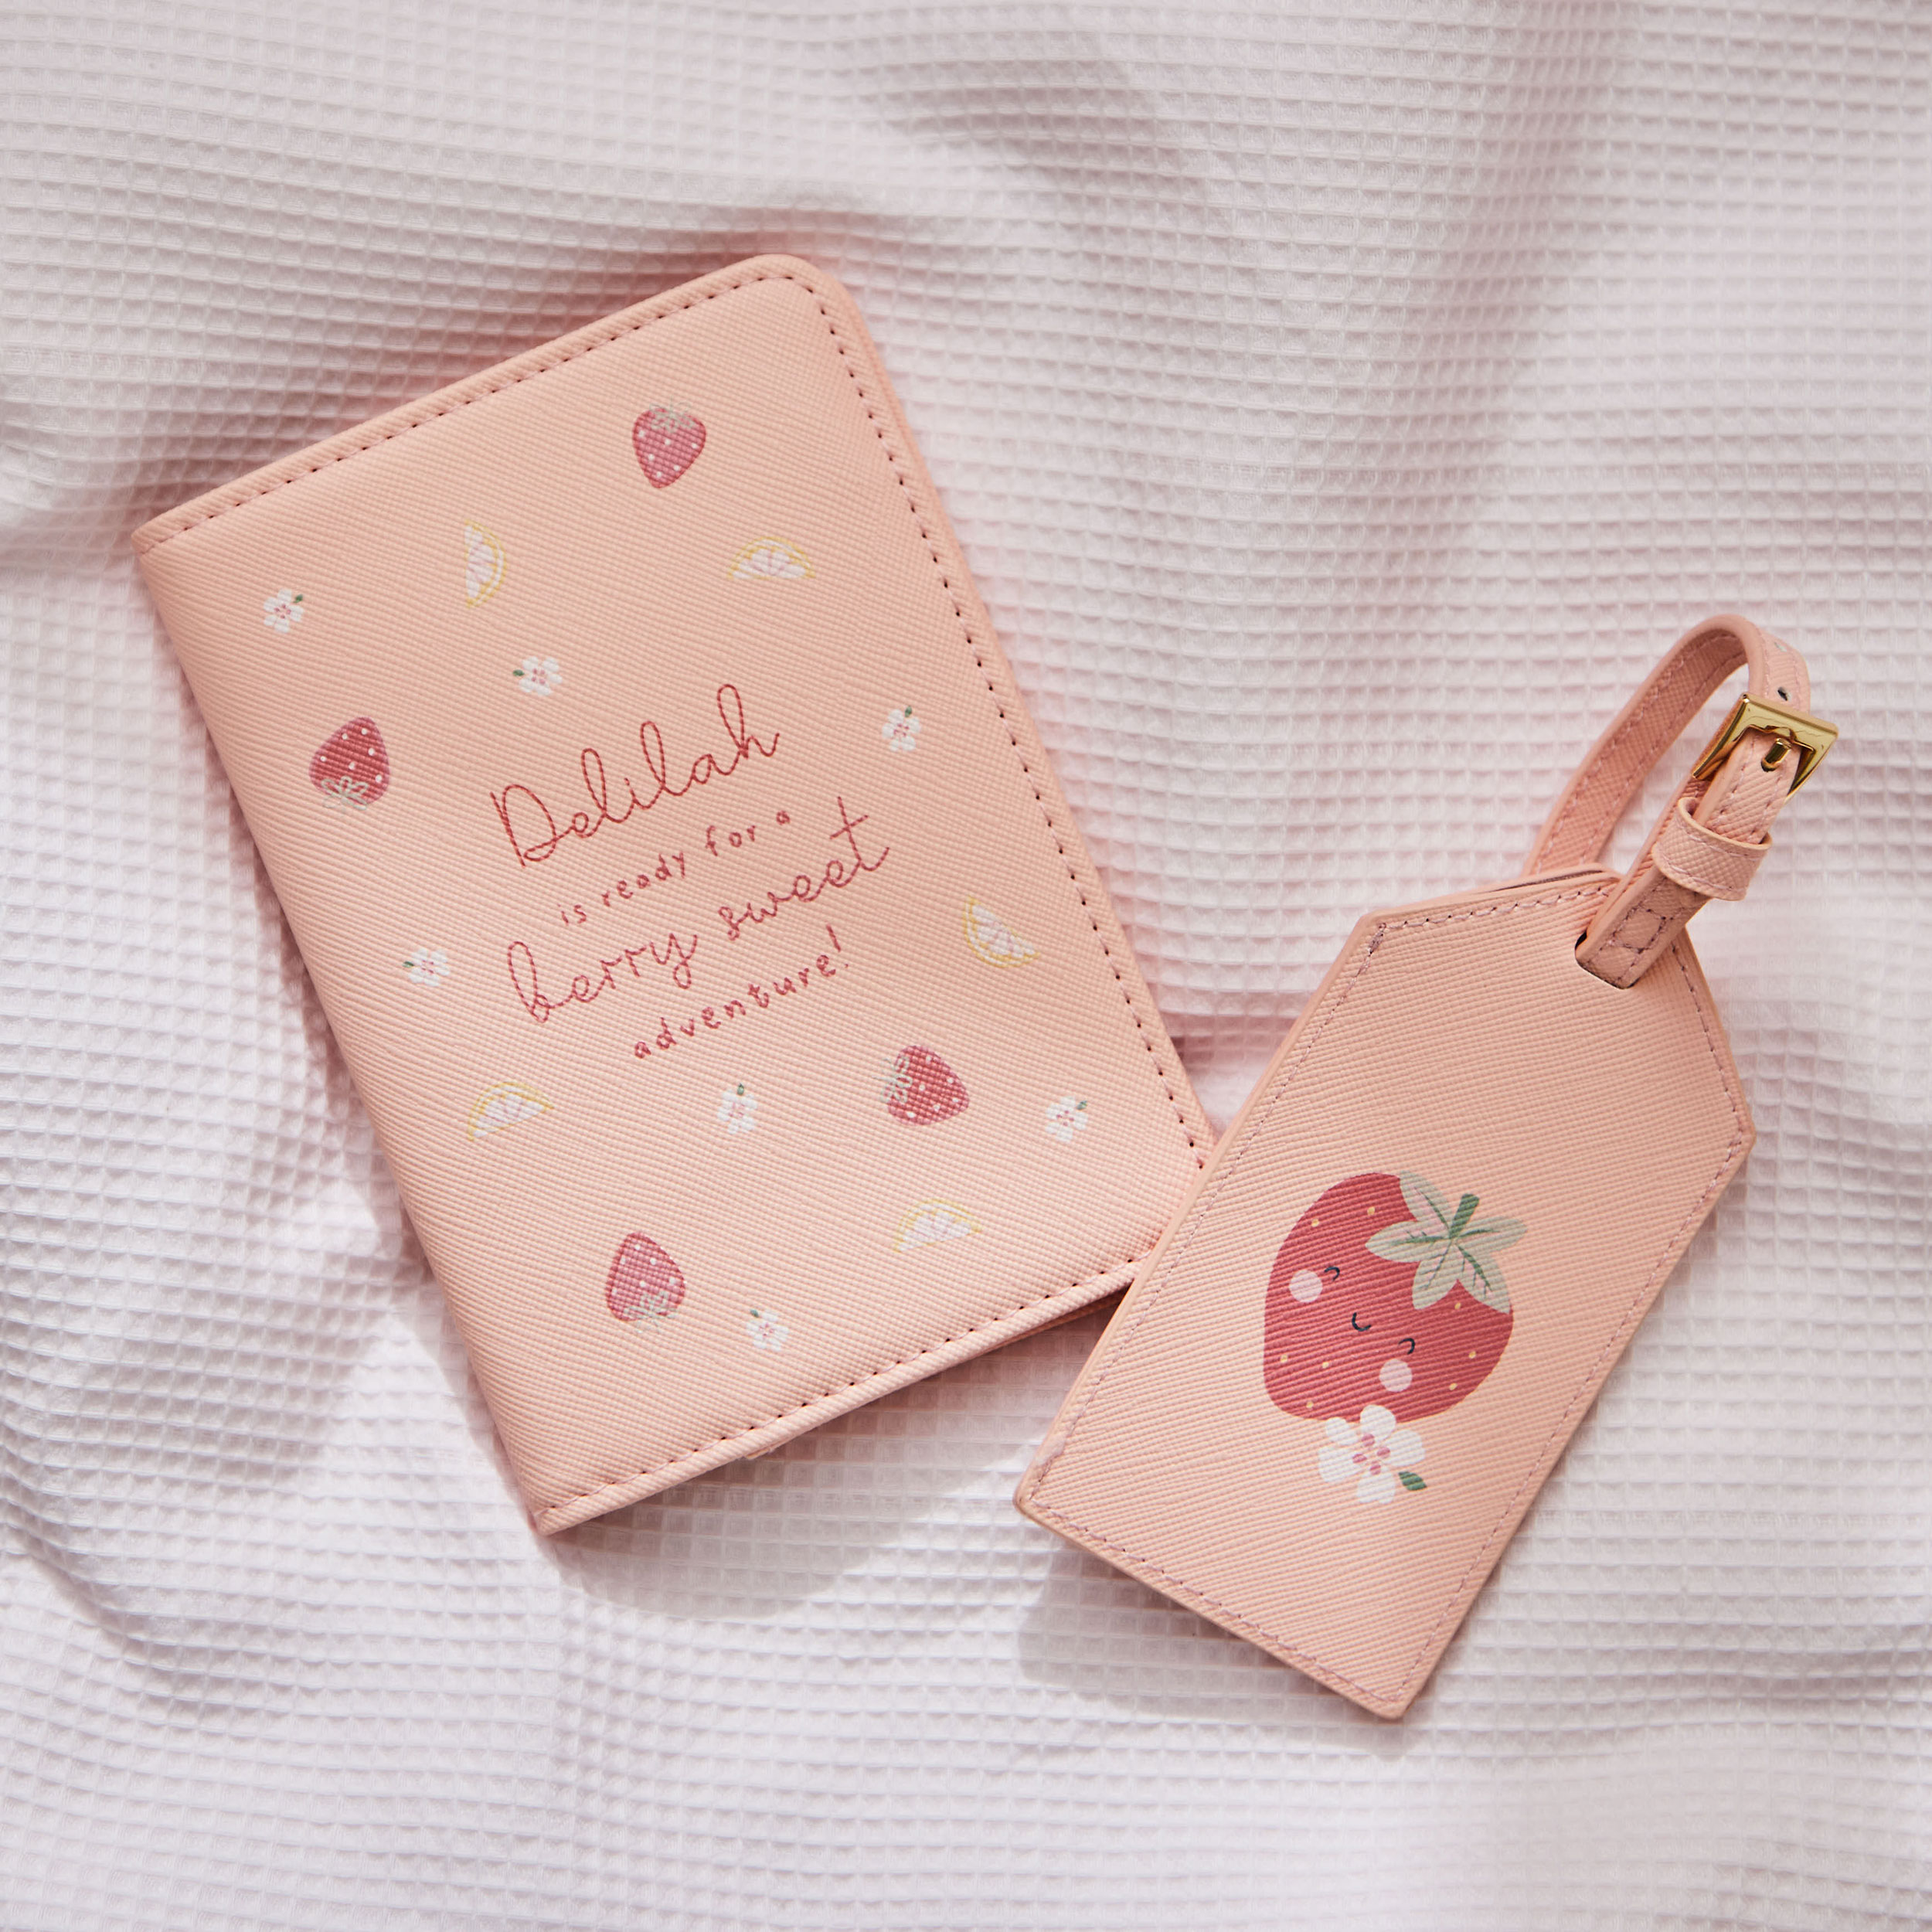 Personalised Berry Sweet Baby Passport Holder & Luggage Tag Set